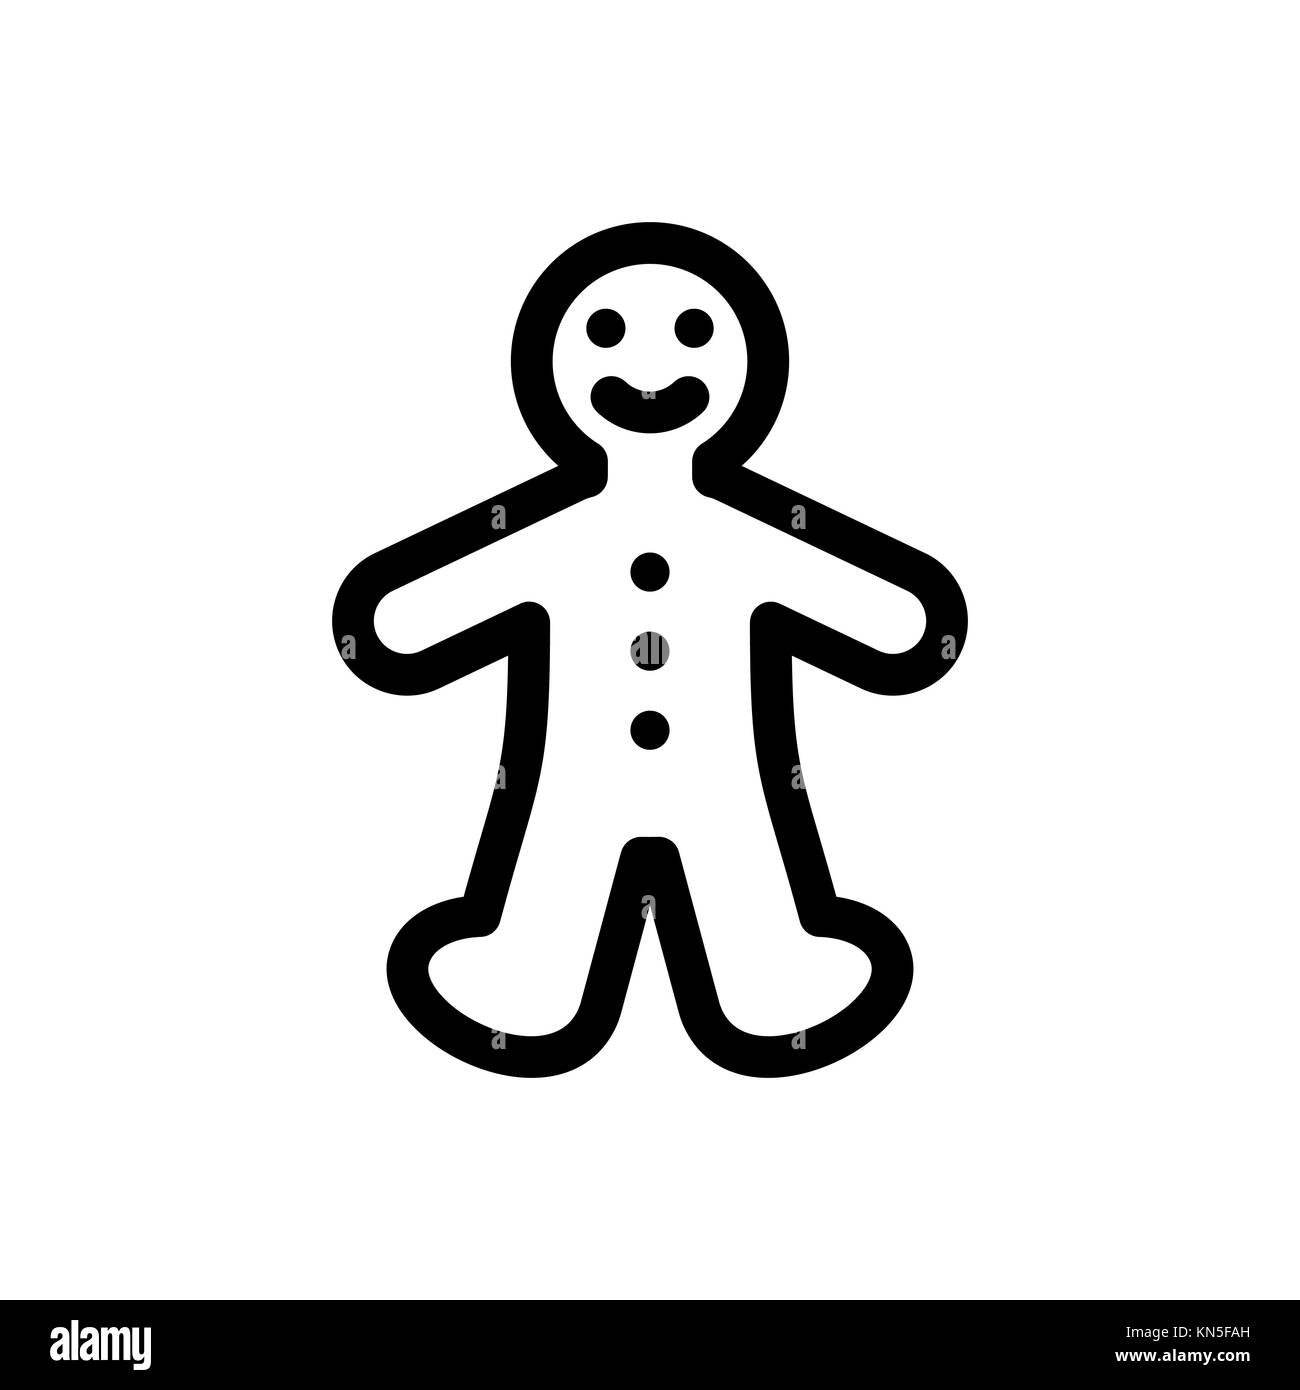 Gingerbread cookie man simple flat icon vector. Stock Vector